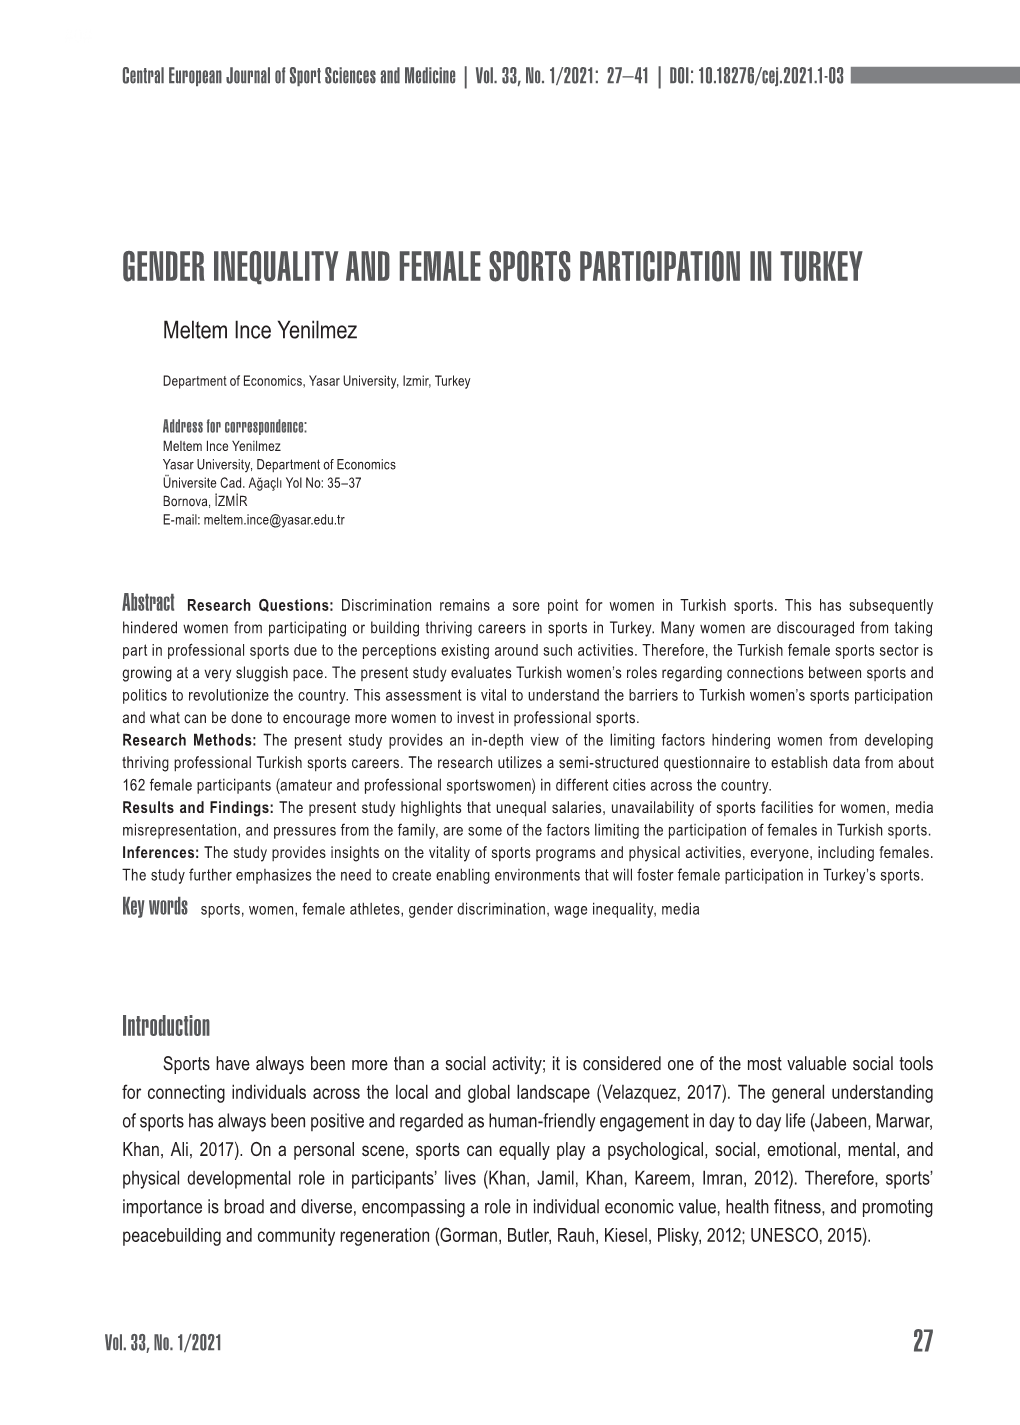 Gender Inequality and Female Sports Participation in Turkey